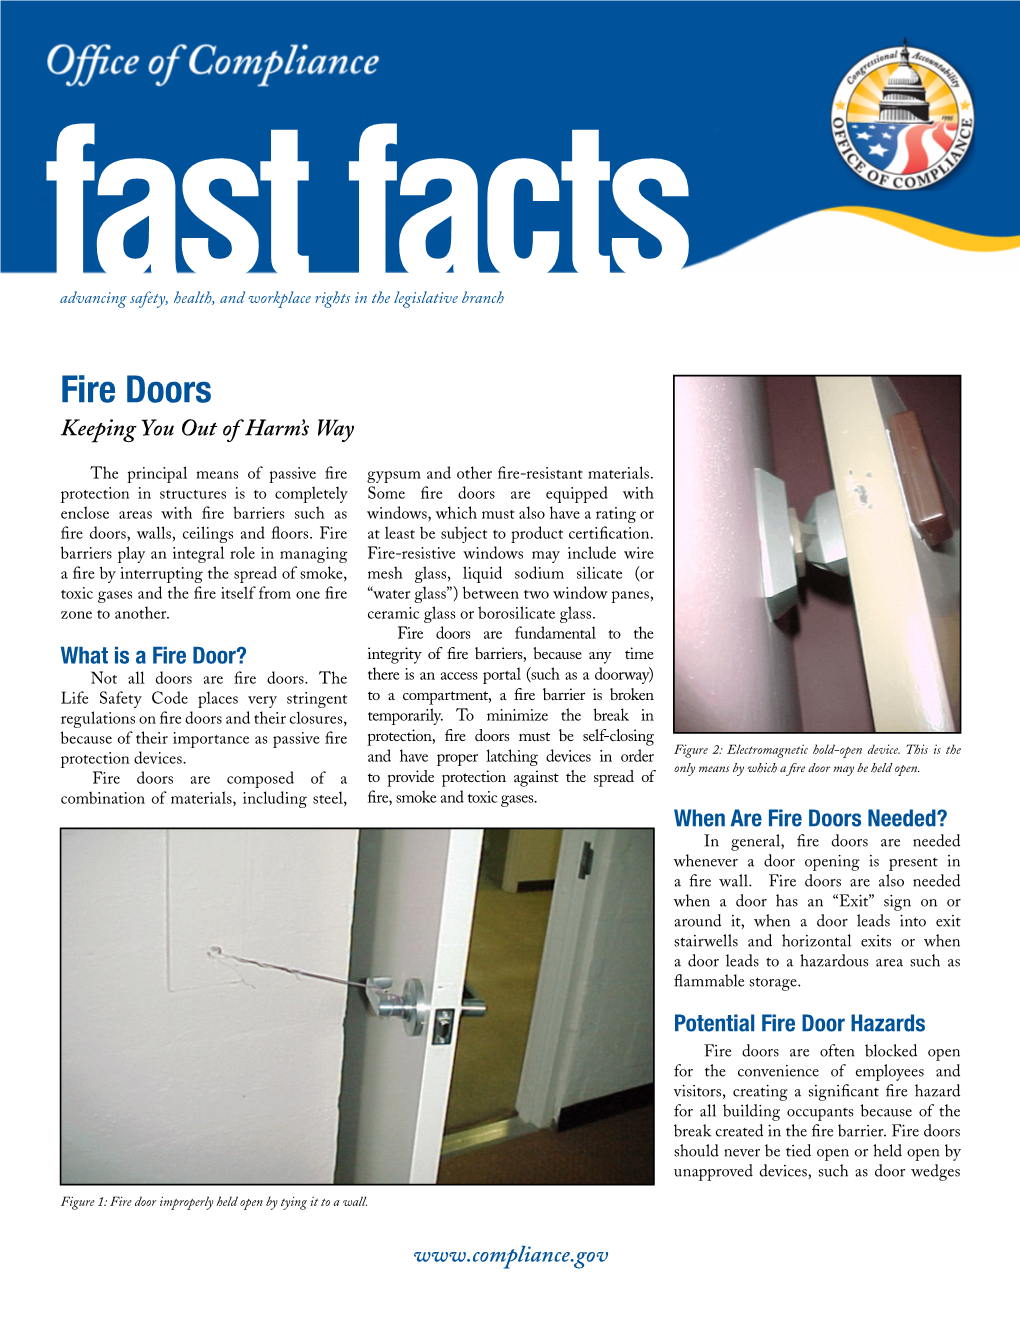 Fire Doors Keeping You out of Harm’S Way